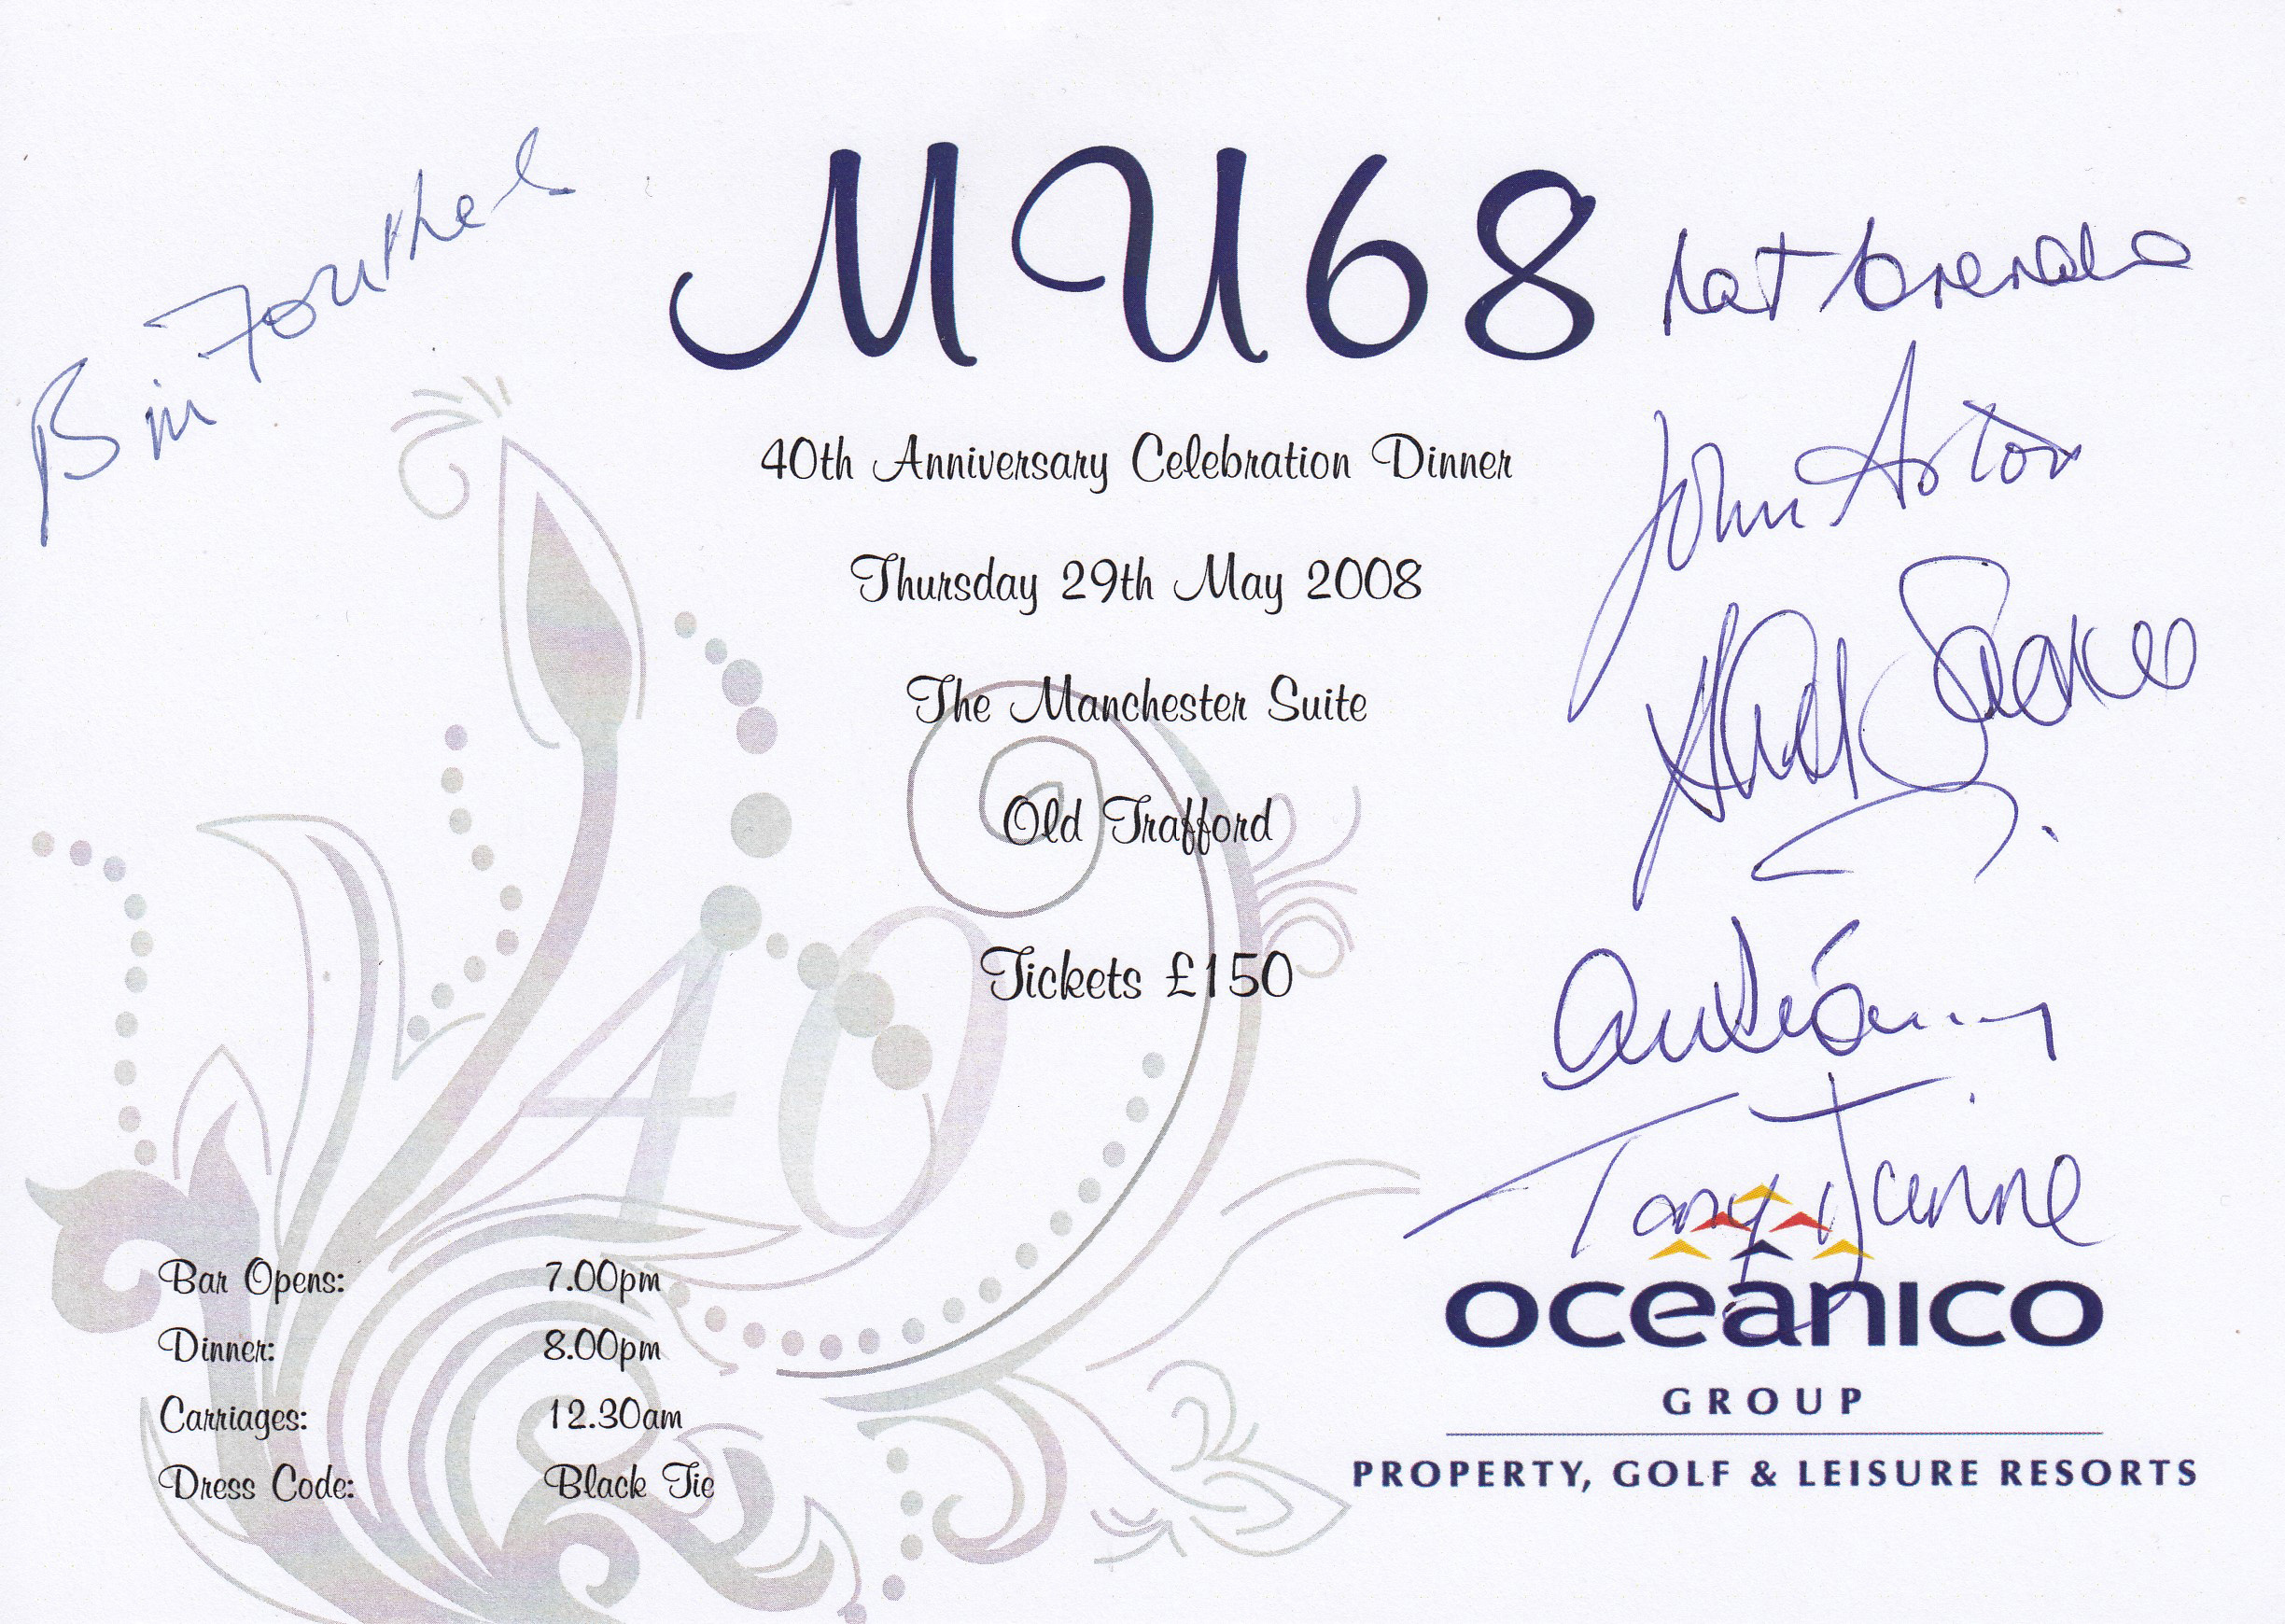 MAN UNITED 1968: Autographed Ticket 29 / 05 / 2008, issued for the 40th Anniversary of Man United'